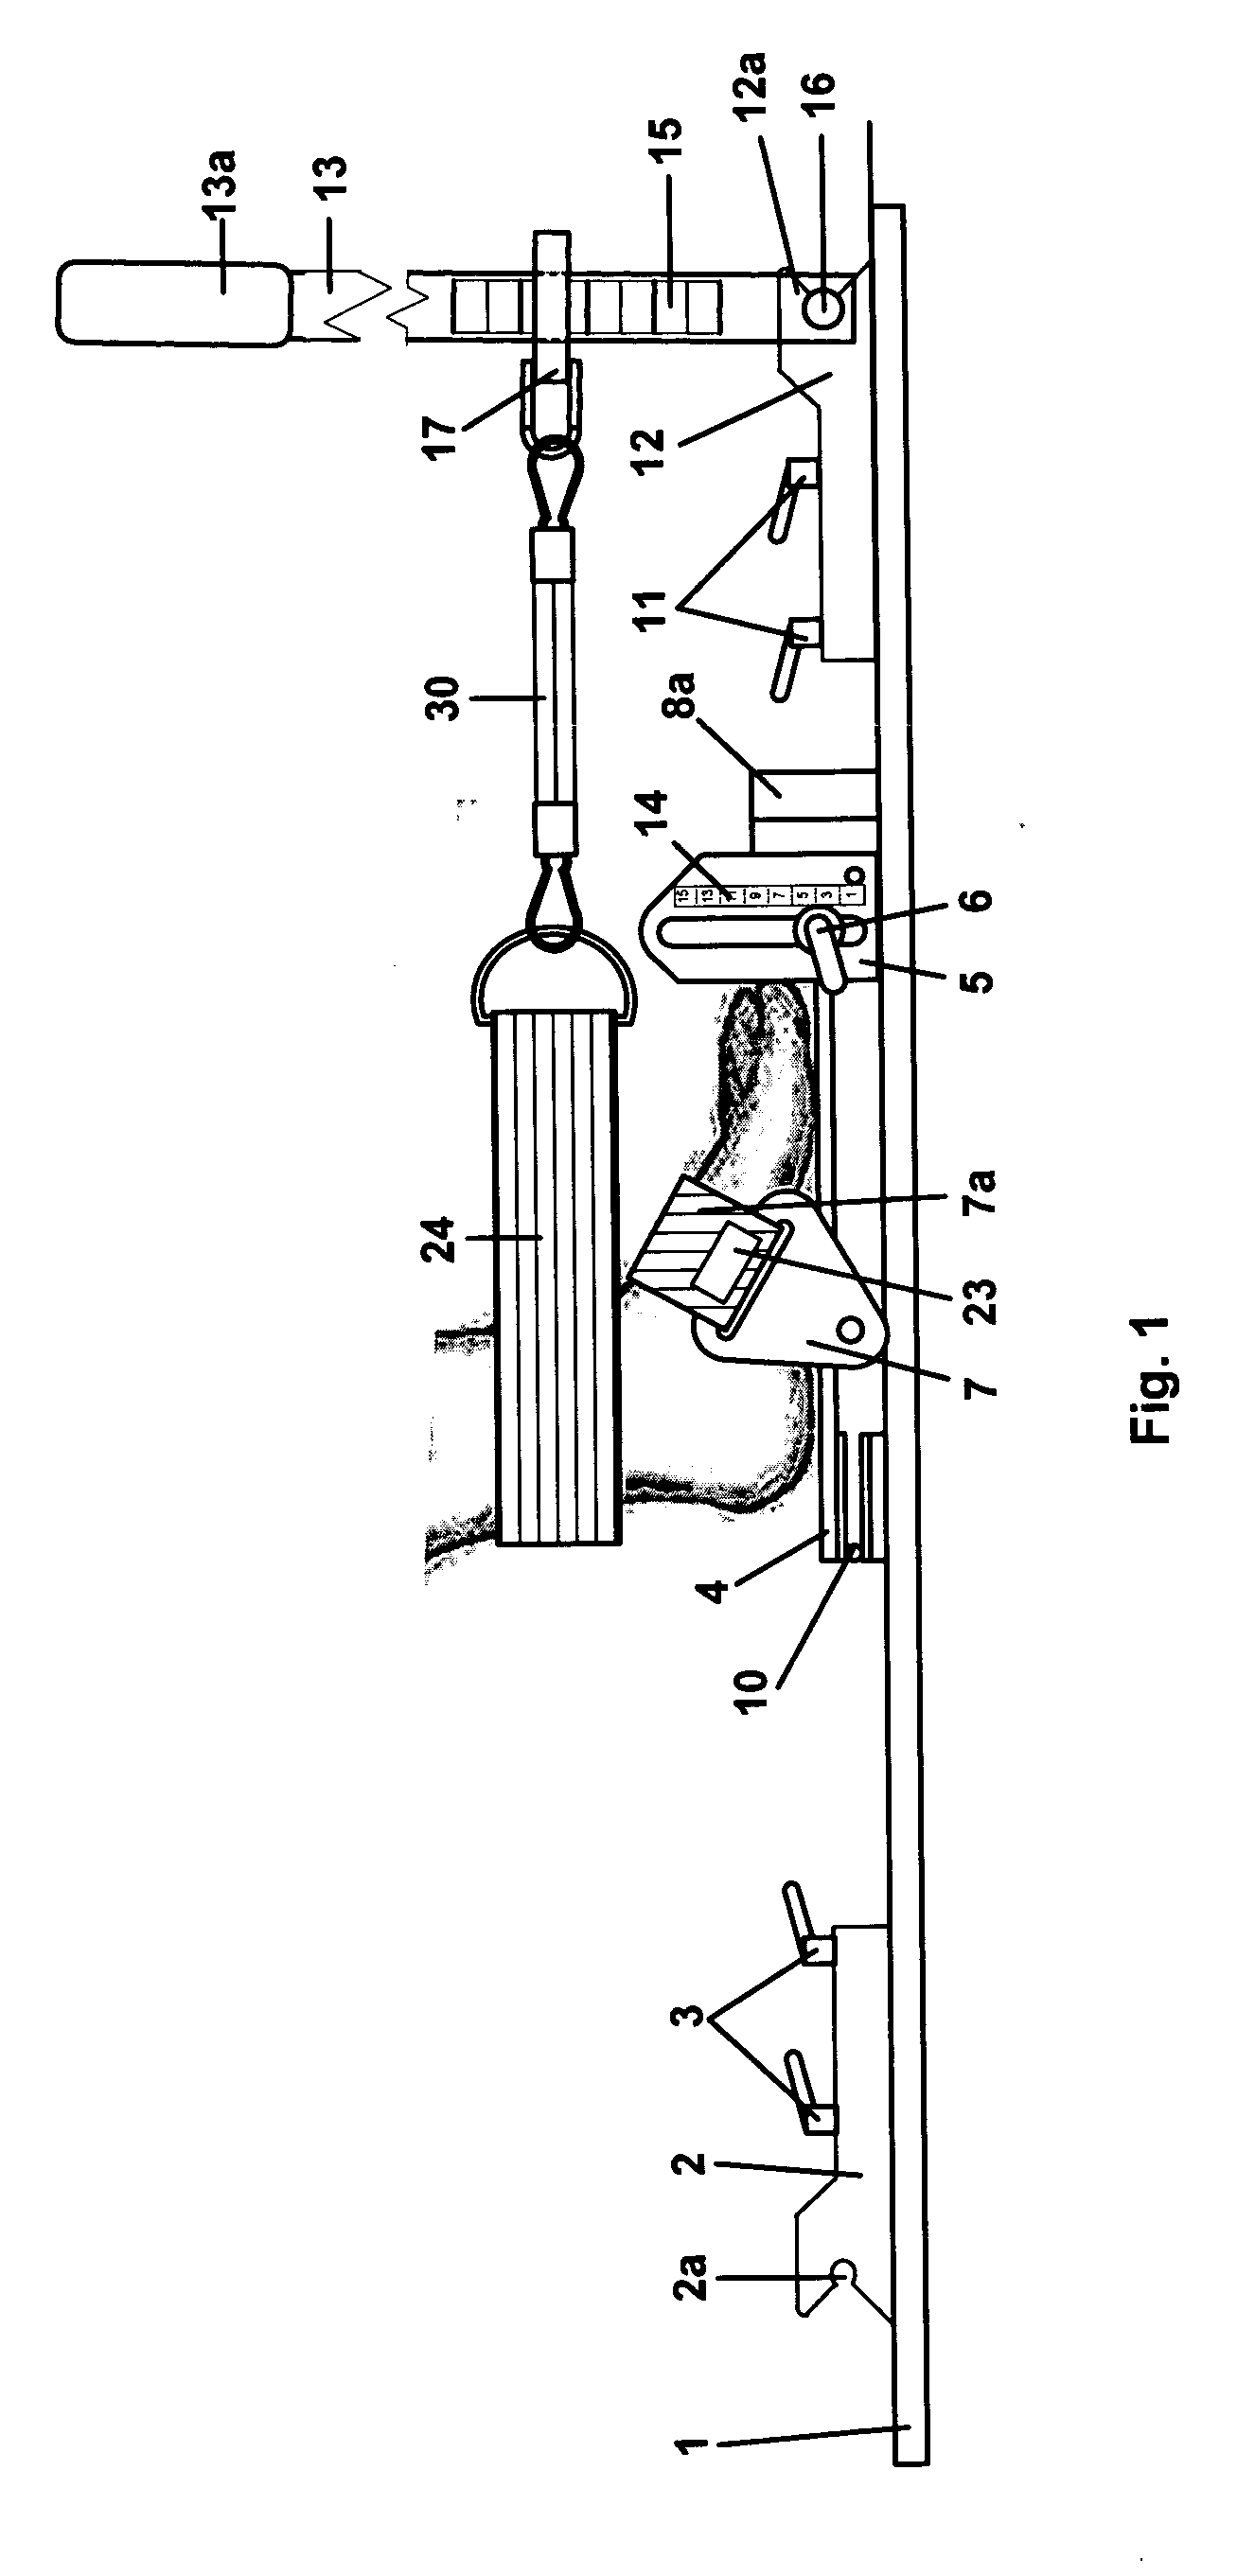 Method and apparatus for anterior and posterior mobilization of the human ankle